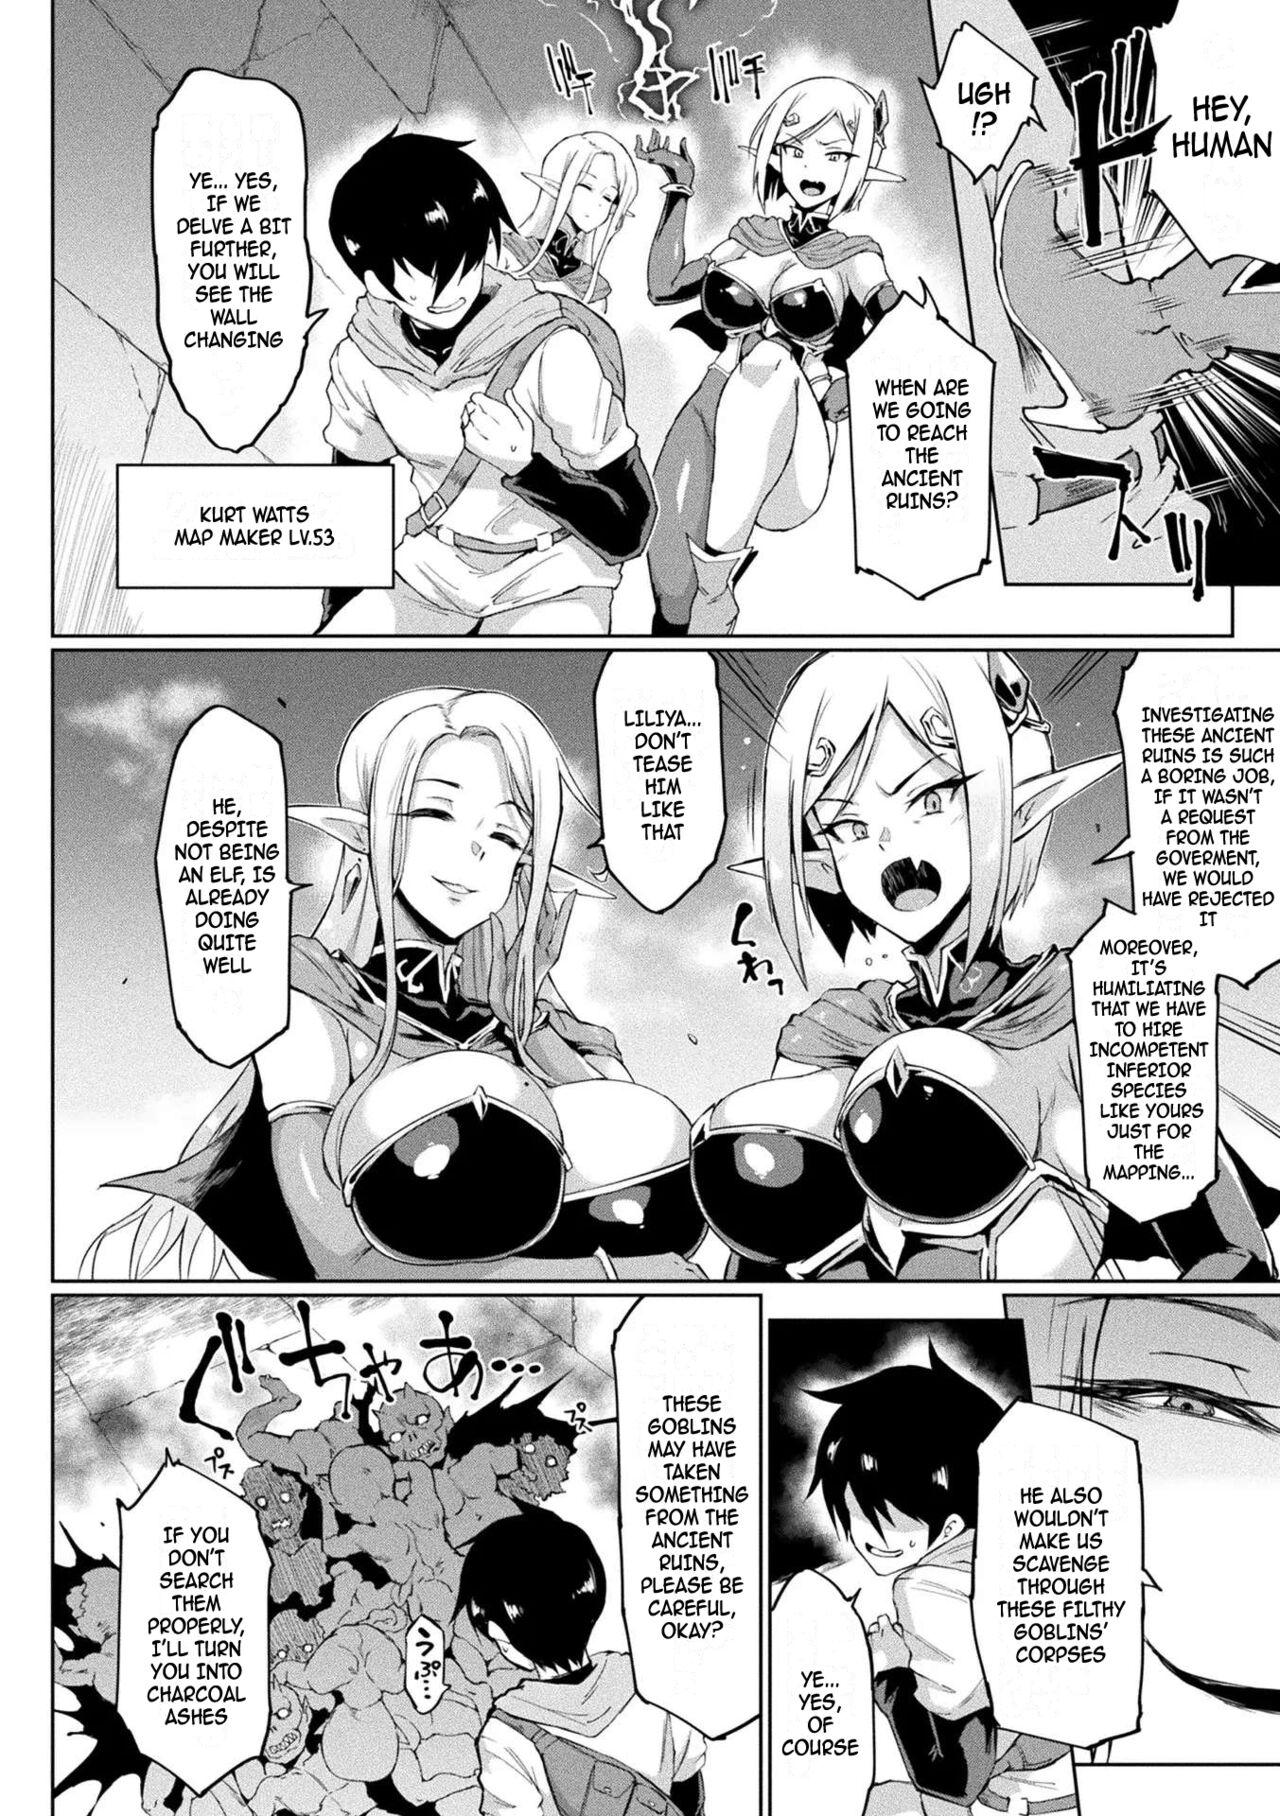 Ass Fetish Time Stop Fantasia Spreading - Page 2